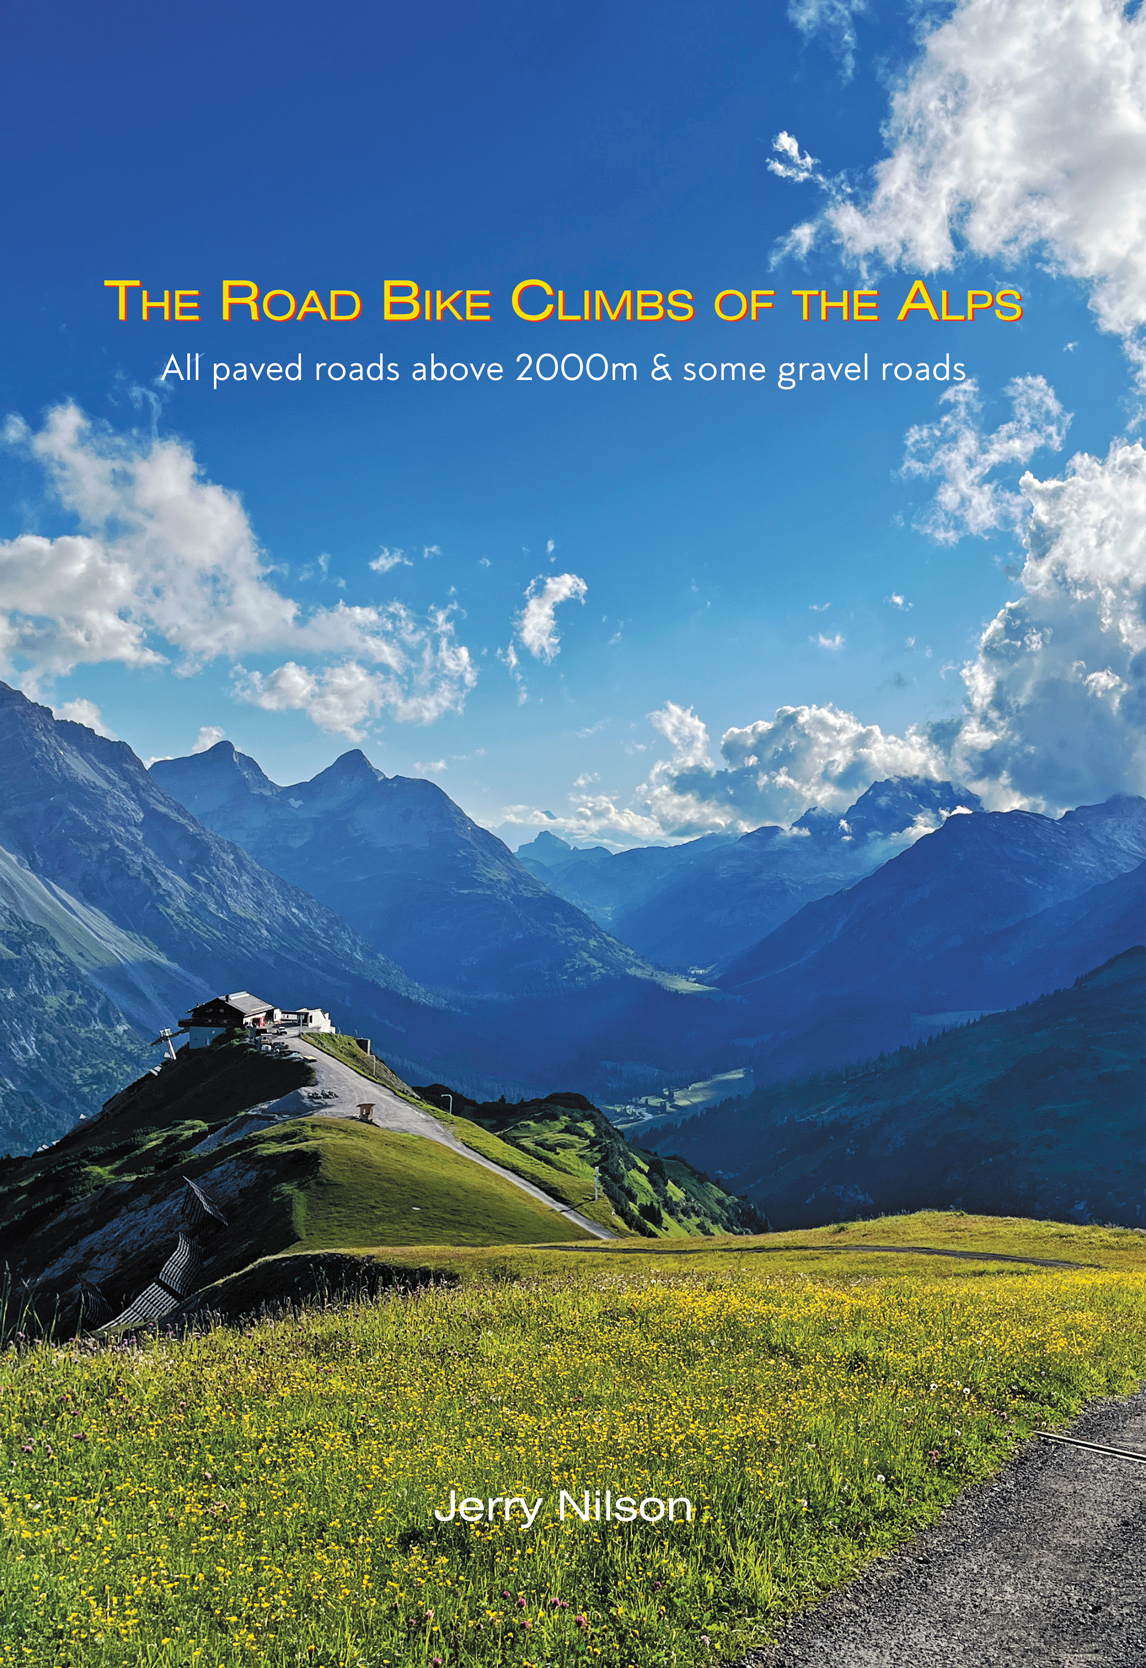 THE ROAD BIKE CLIMBS OF THE ALPS: All paved roads above 2000m & some gravel roads